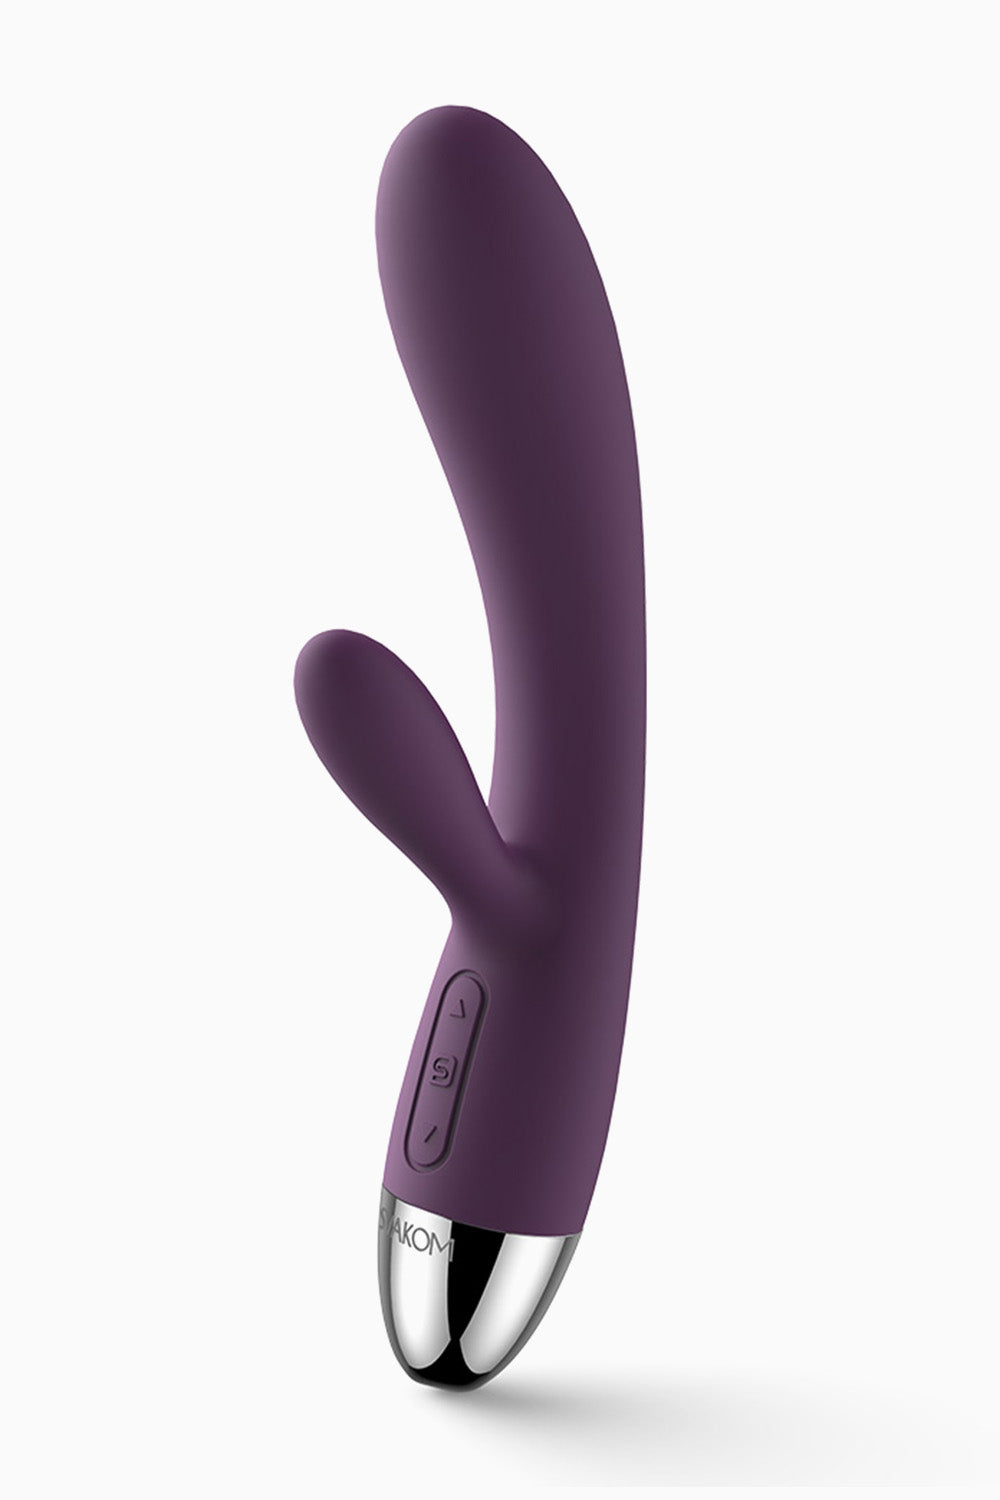 Svakom Alice Rabbit Rechargeable Vibrator Violet, 6.5 Inches